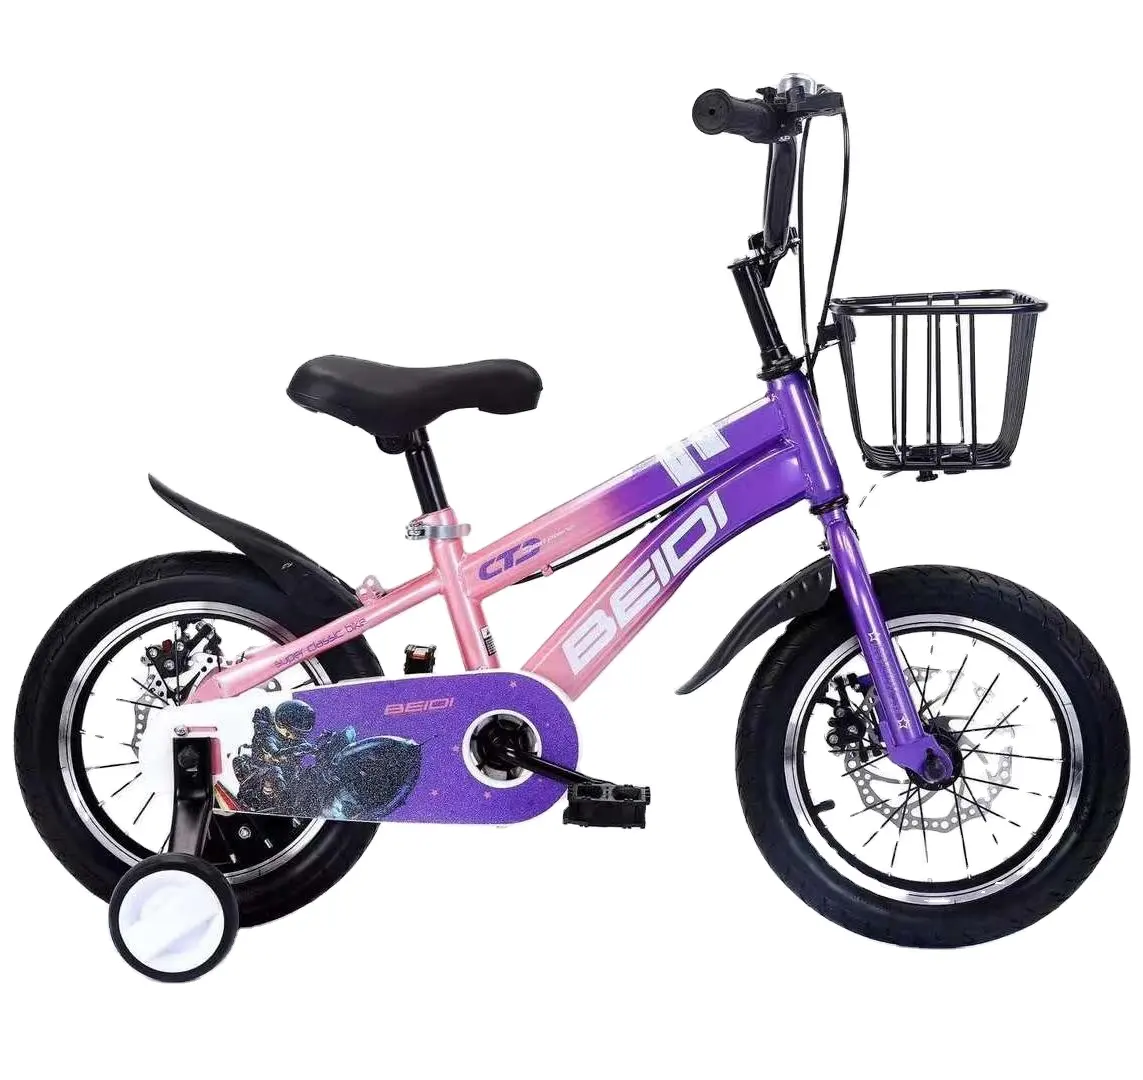 disc brake bicycle kid's bicycle with high quality hollow rim double brake stock bike for 6 years old